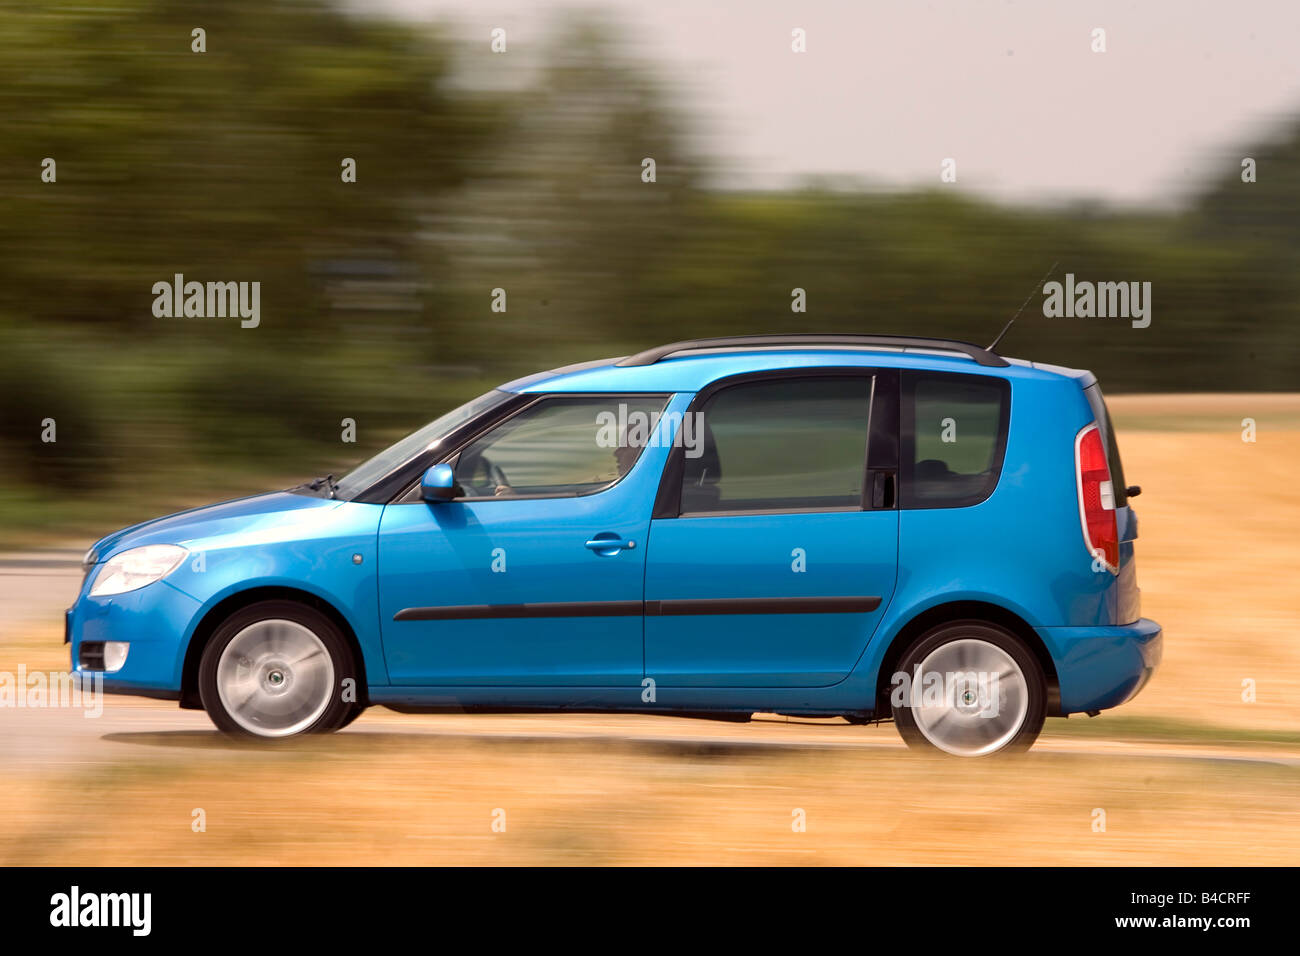 Skoda Roomster 1.9 TDI, model year 2006-, blue moving, side view, country road Stock Photo